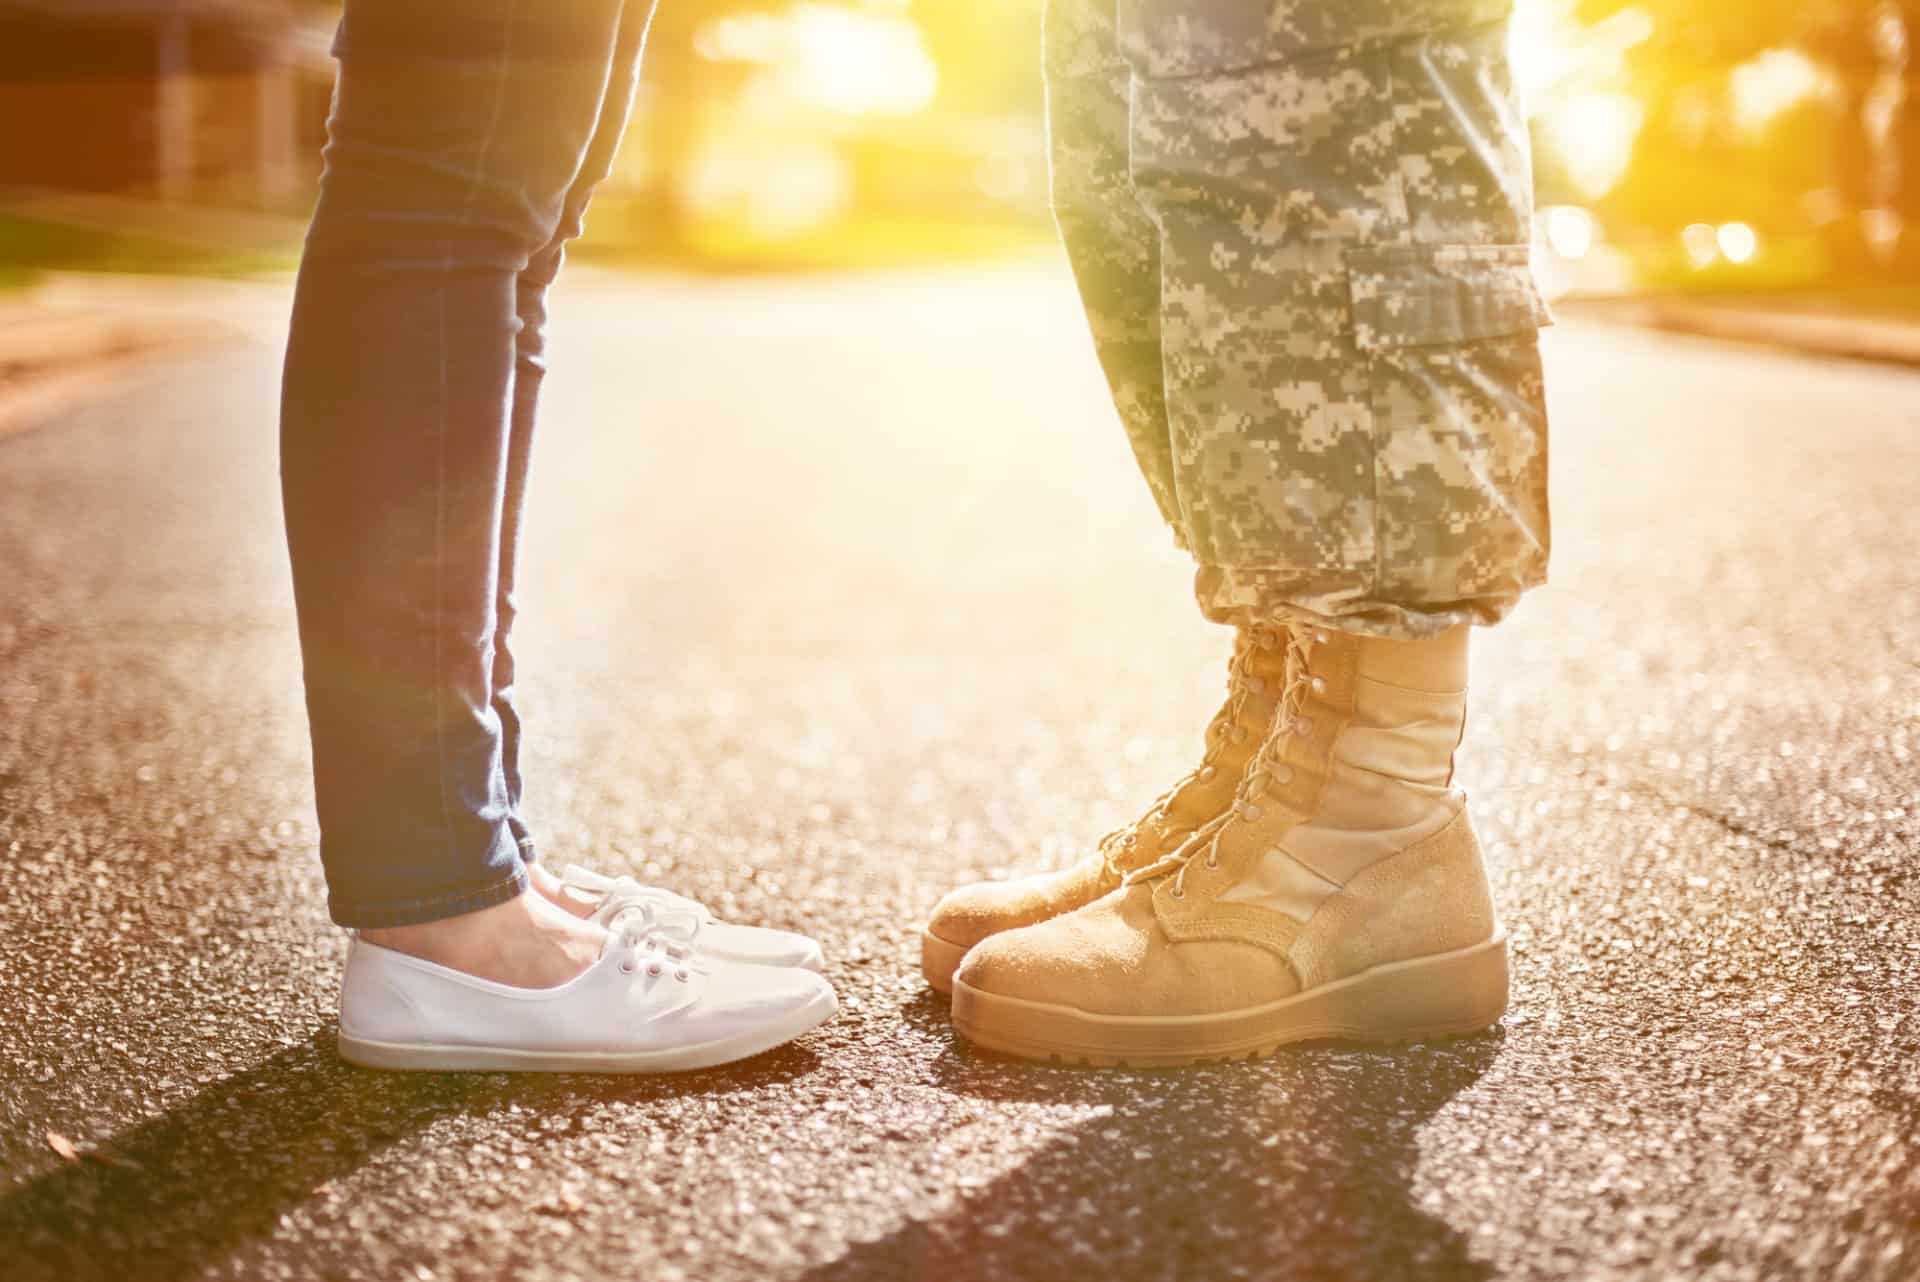 Soldier stand with wife together